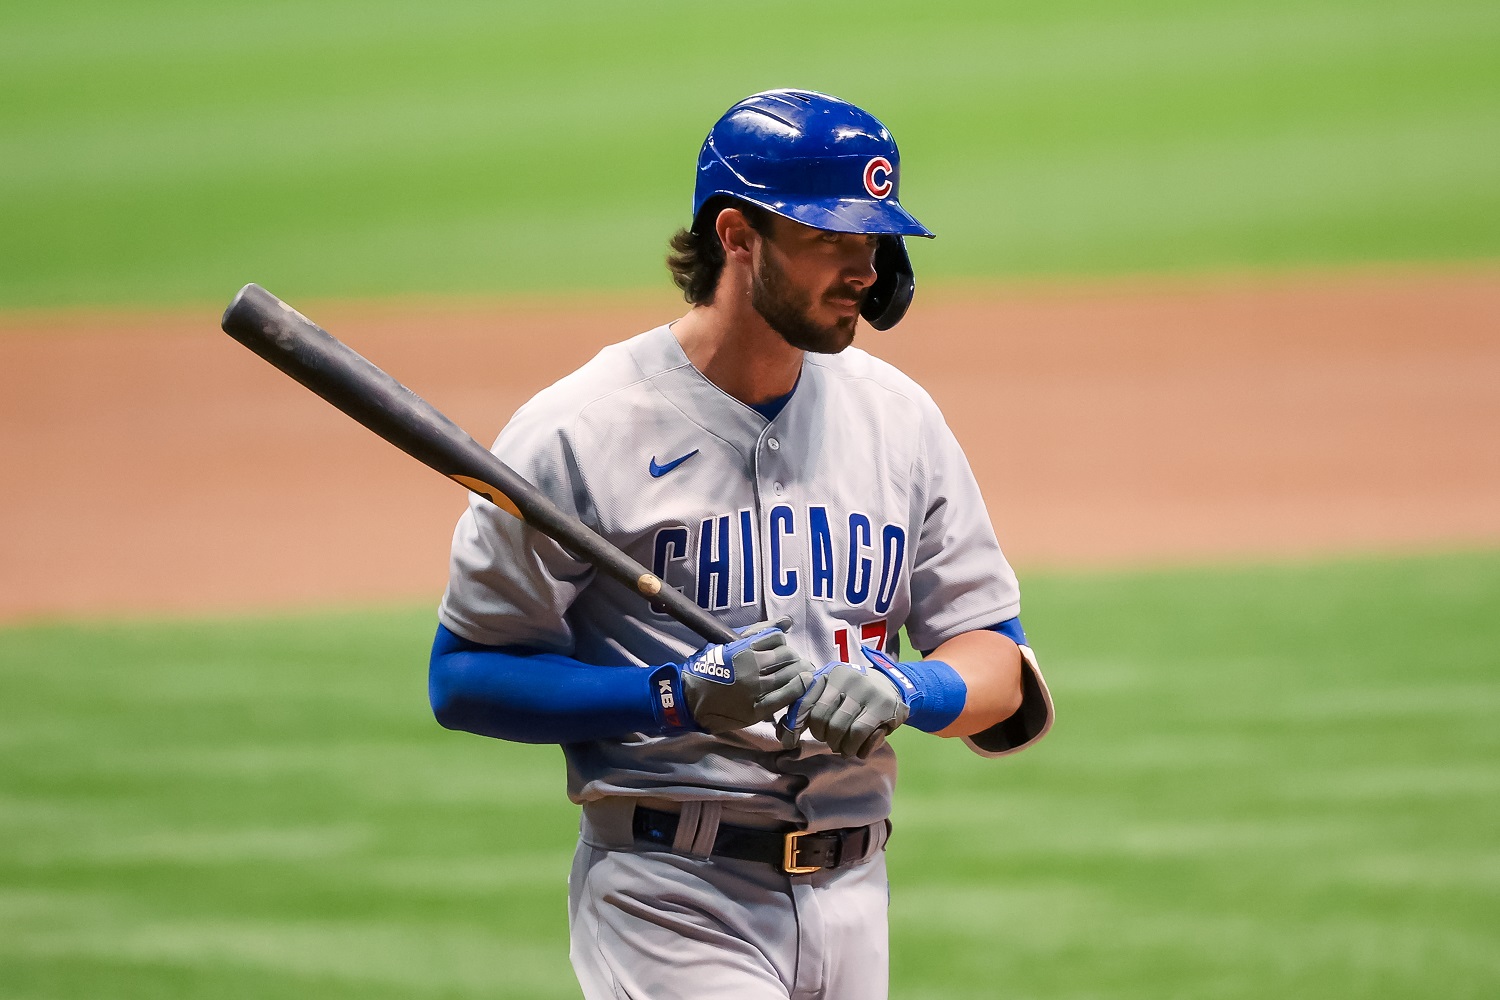 How Concerned Should the Chicago Cubs Be About Kris Bryant